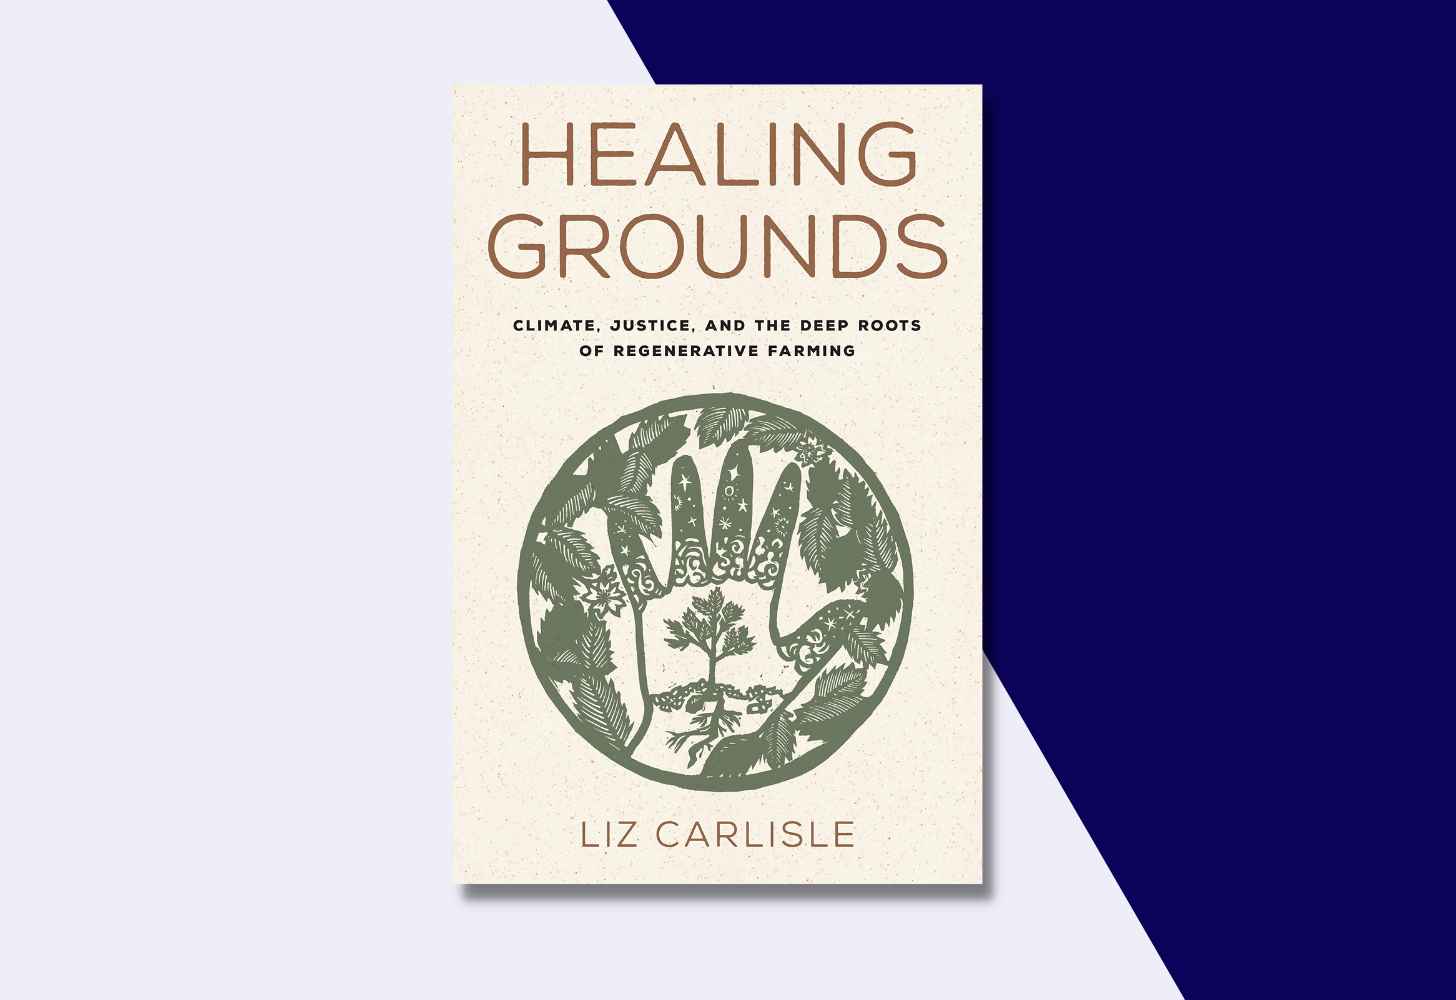 The Cover Of “Healing Grounds: Climate, Justice, and the Deep Roots of Regenerative Farming” by Liz Carlisle